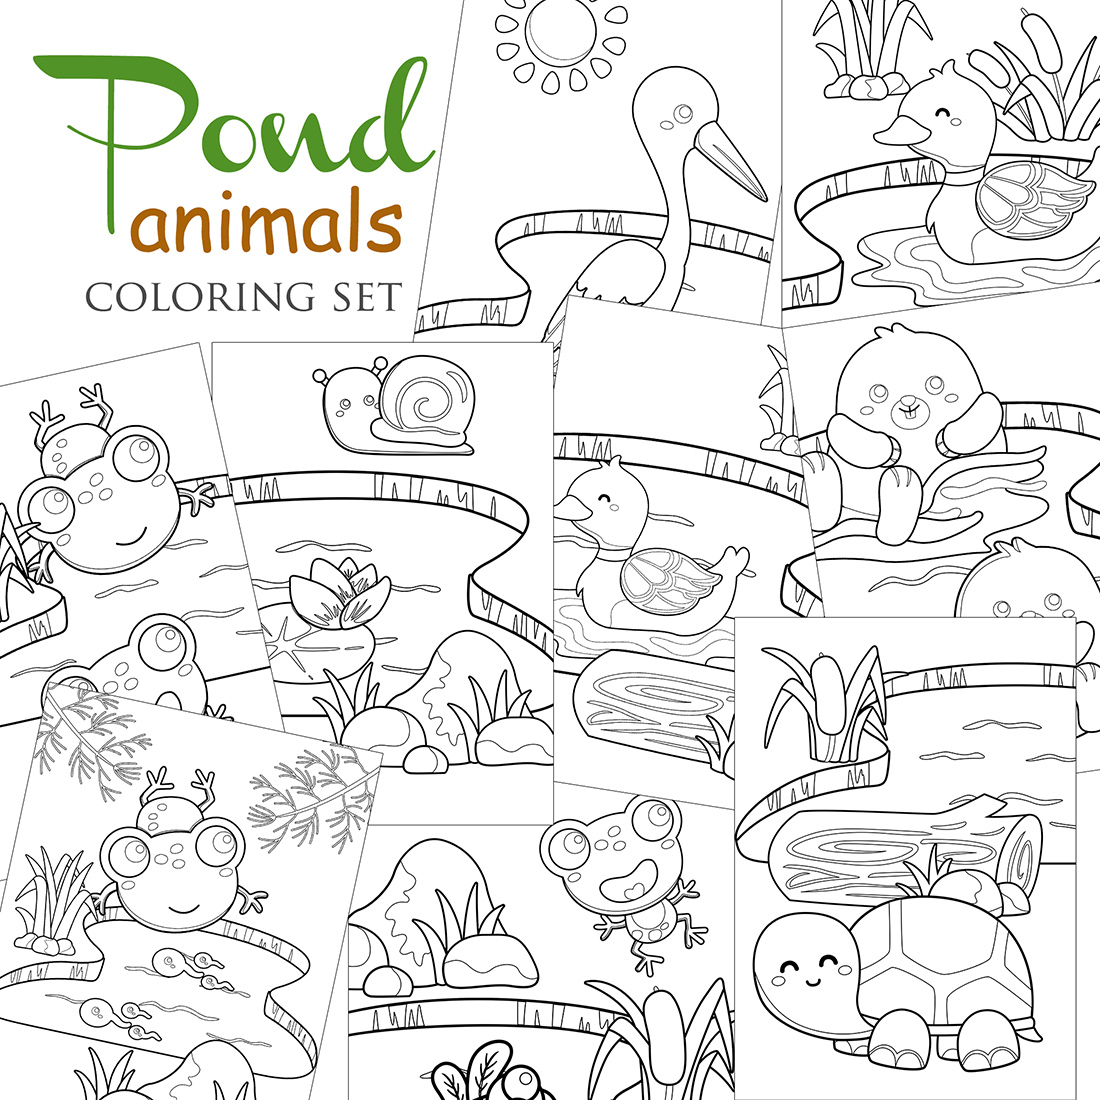 Pond Animals Frog Duck Turtle Beaver Raven Nature Coloring Pages for Kids and Adult cover image.